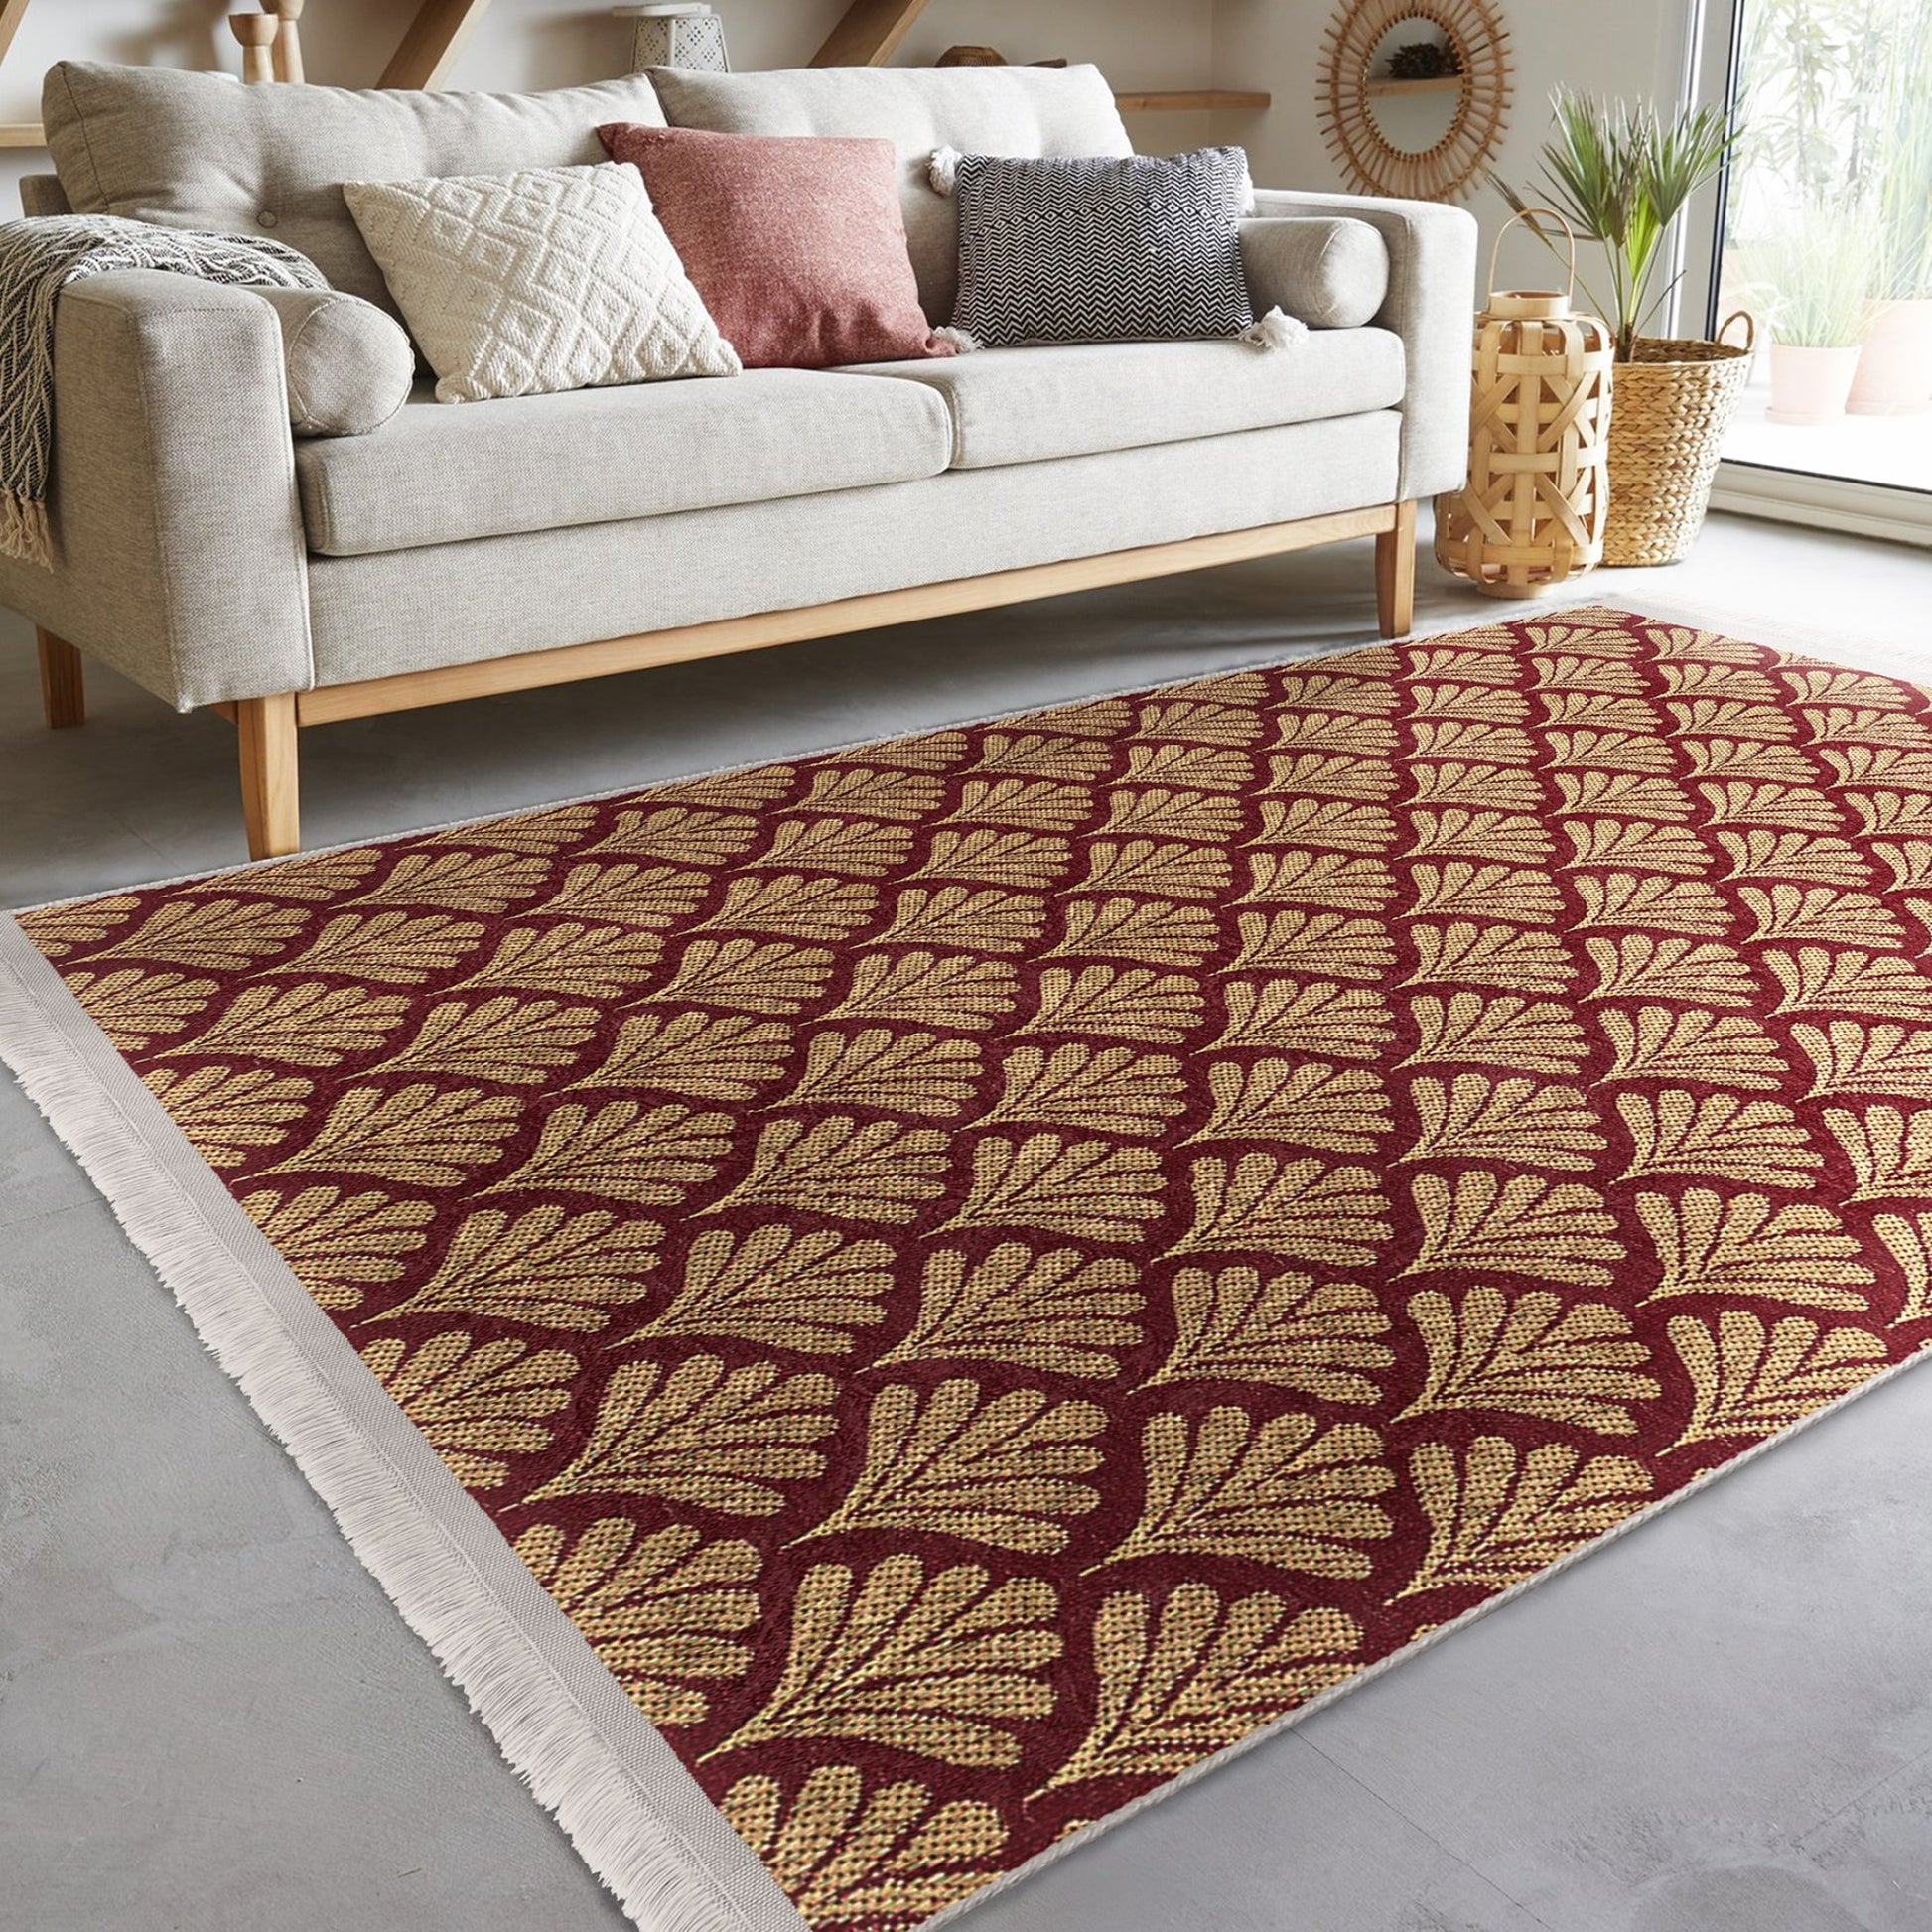 Leaf Pattern with Gold Motif Rug - Front View